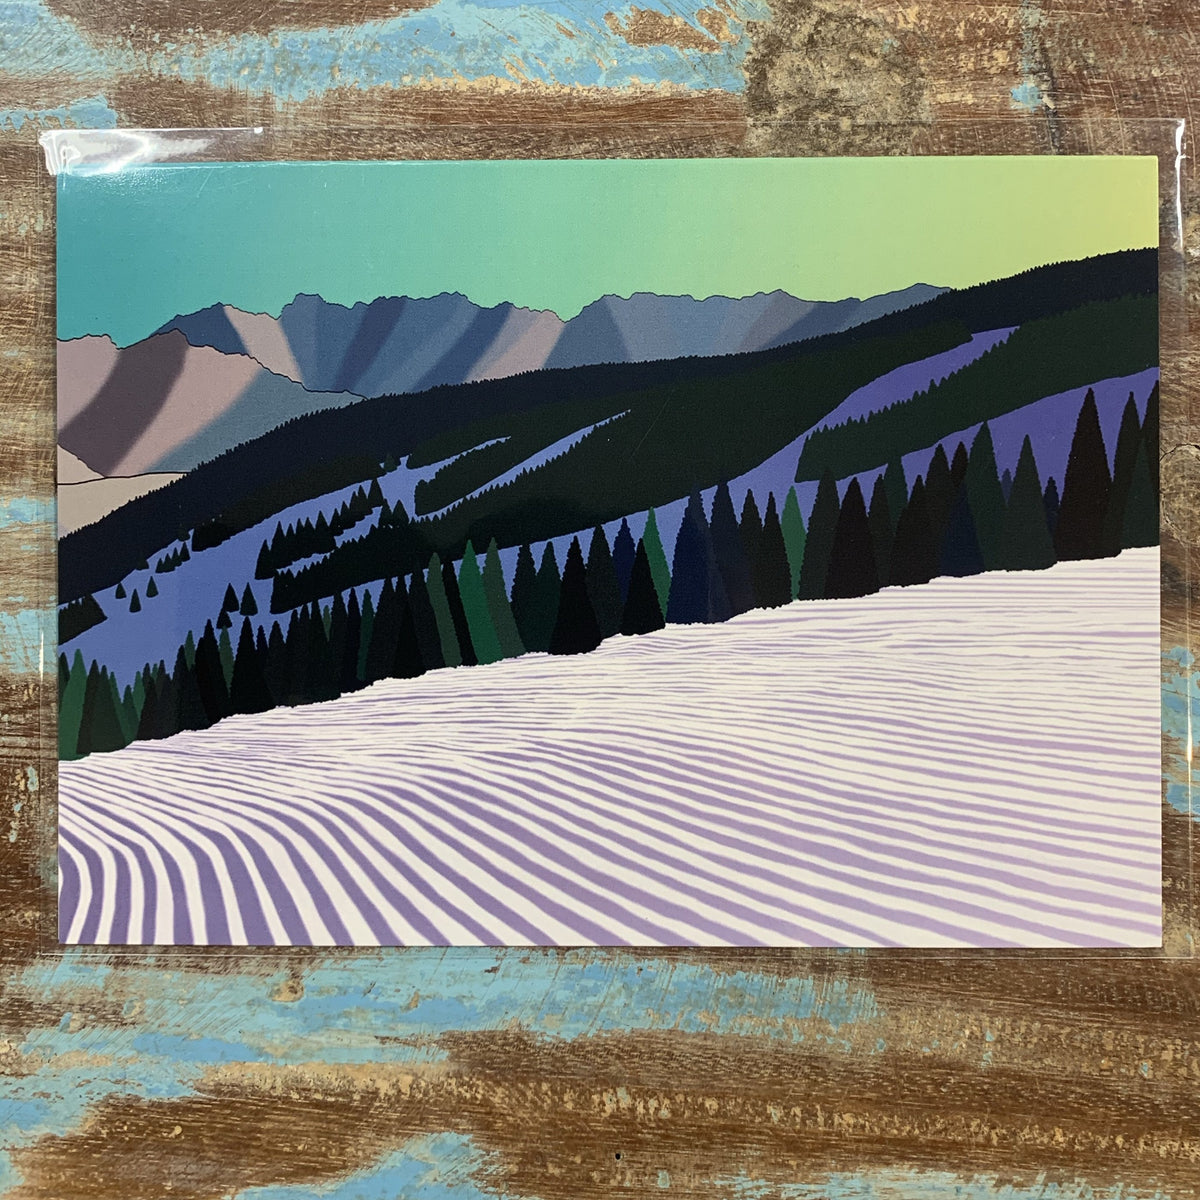 5x7 Greeting Card Version of "Vail" by Topher Strauss